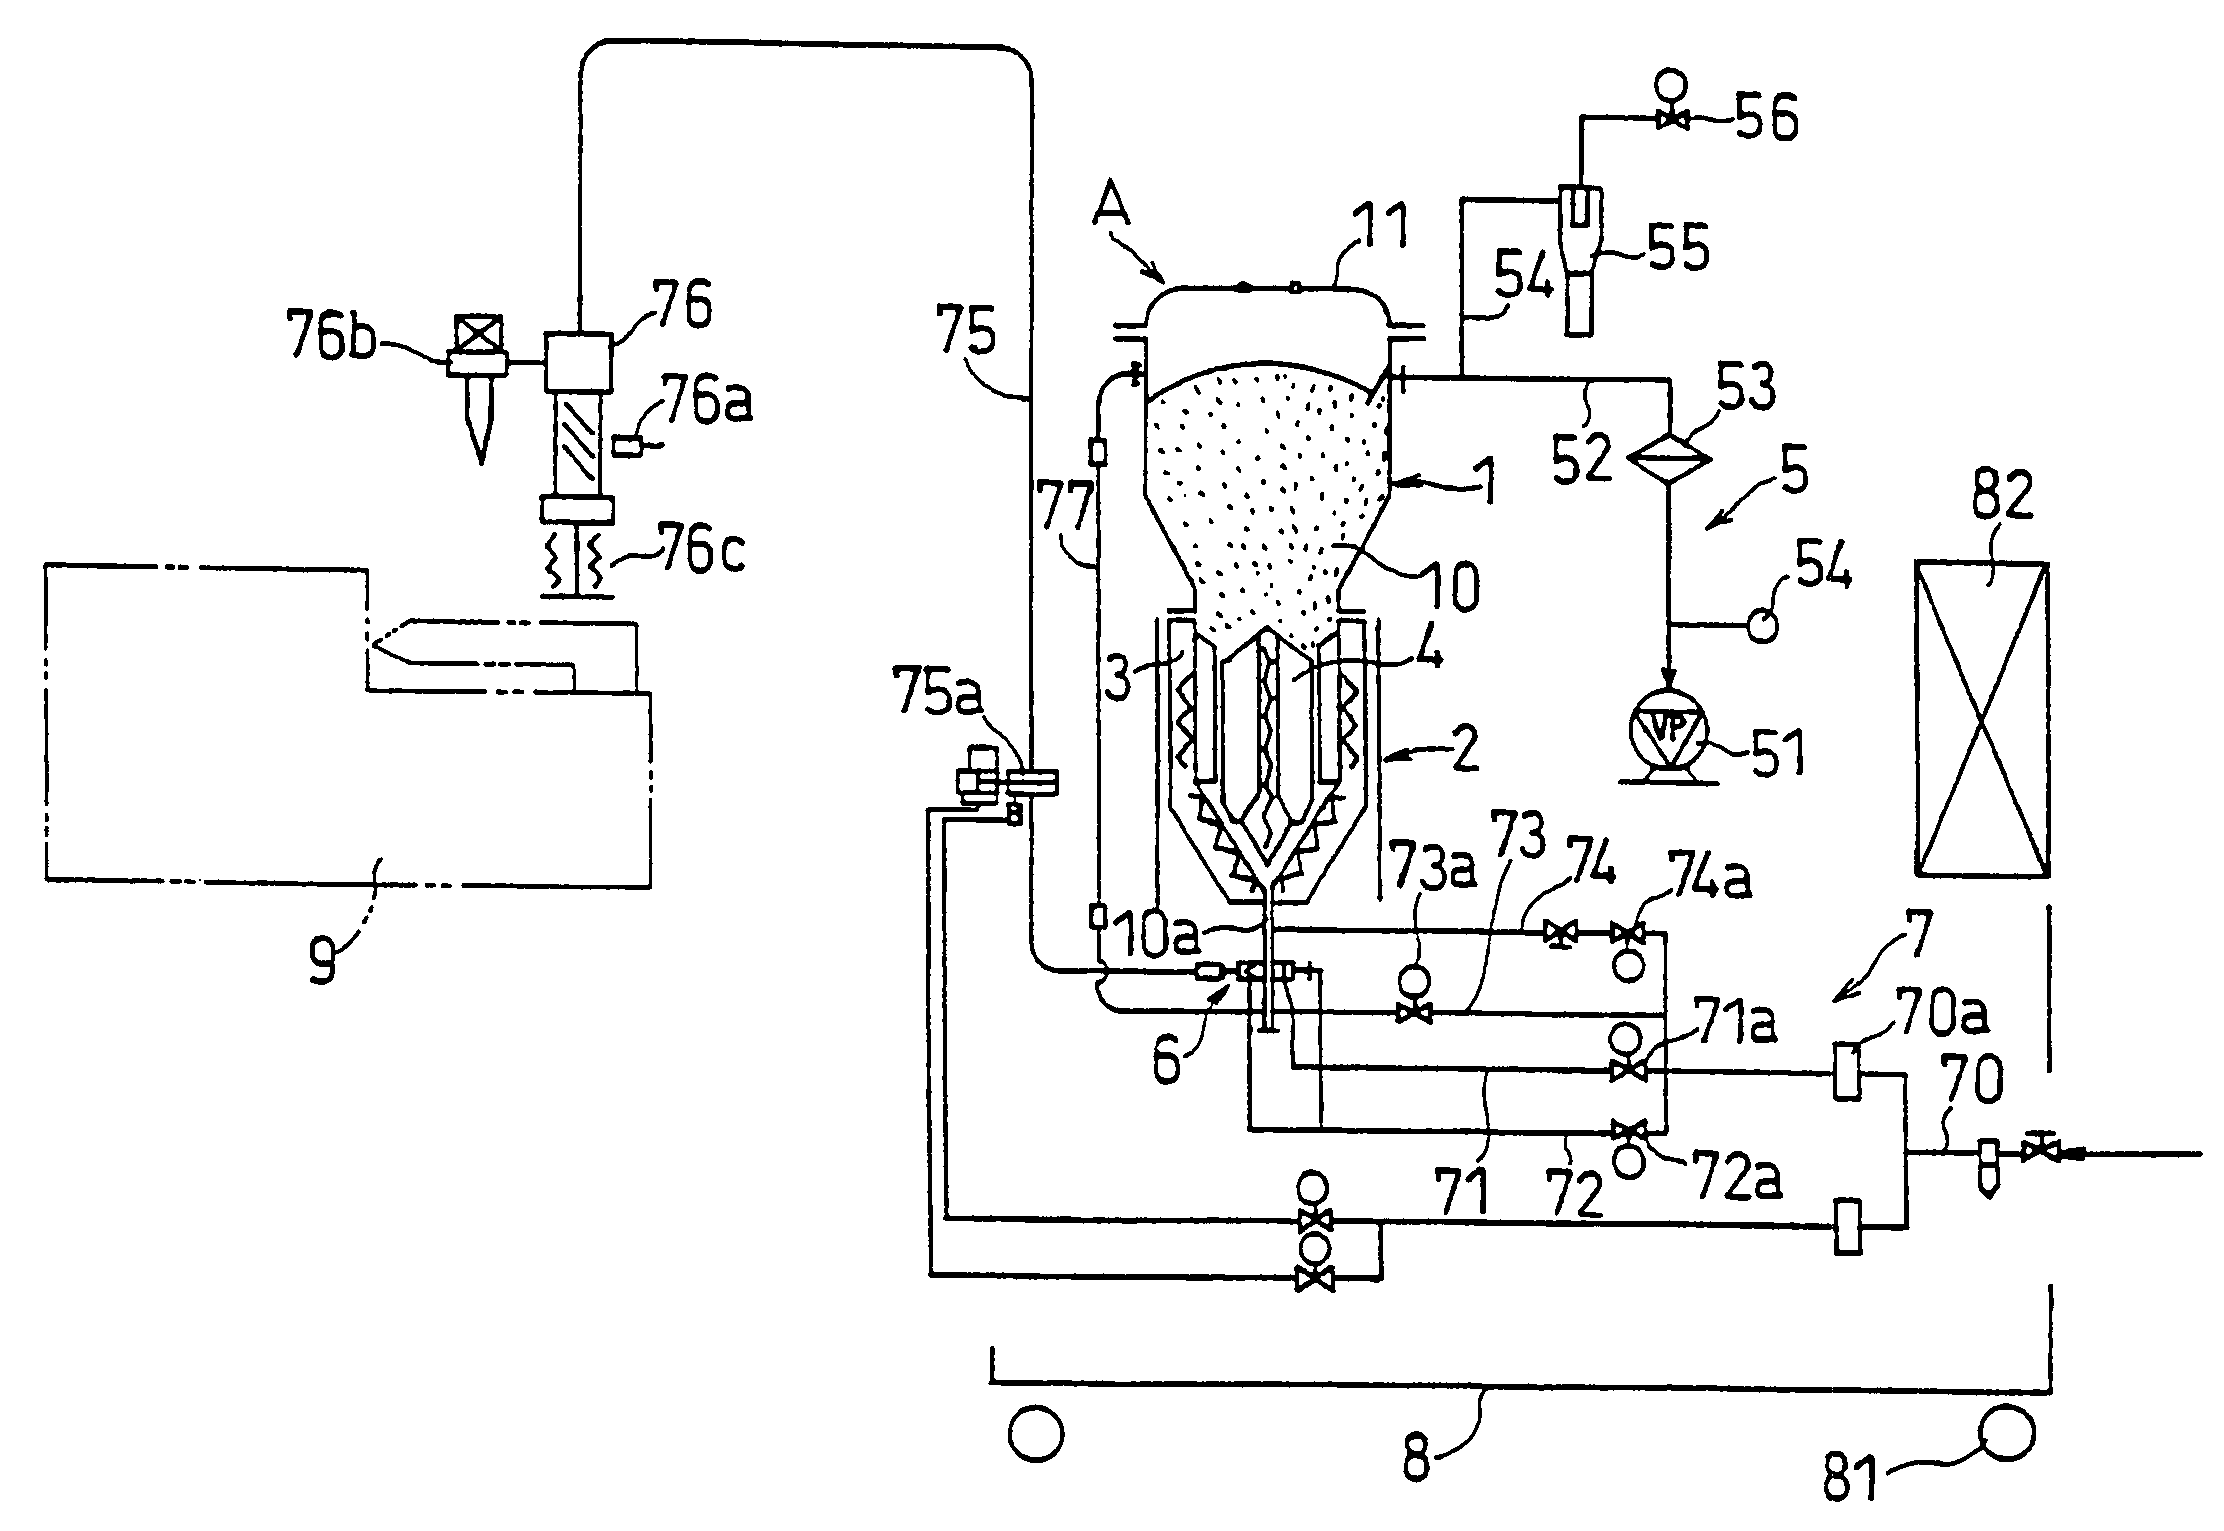 Drying-storing apparatus for powdered or granular material and feeding system for powdered or granular material